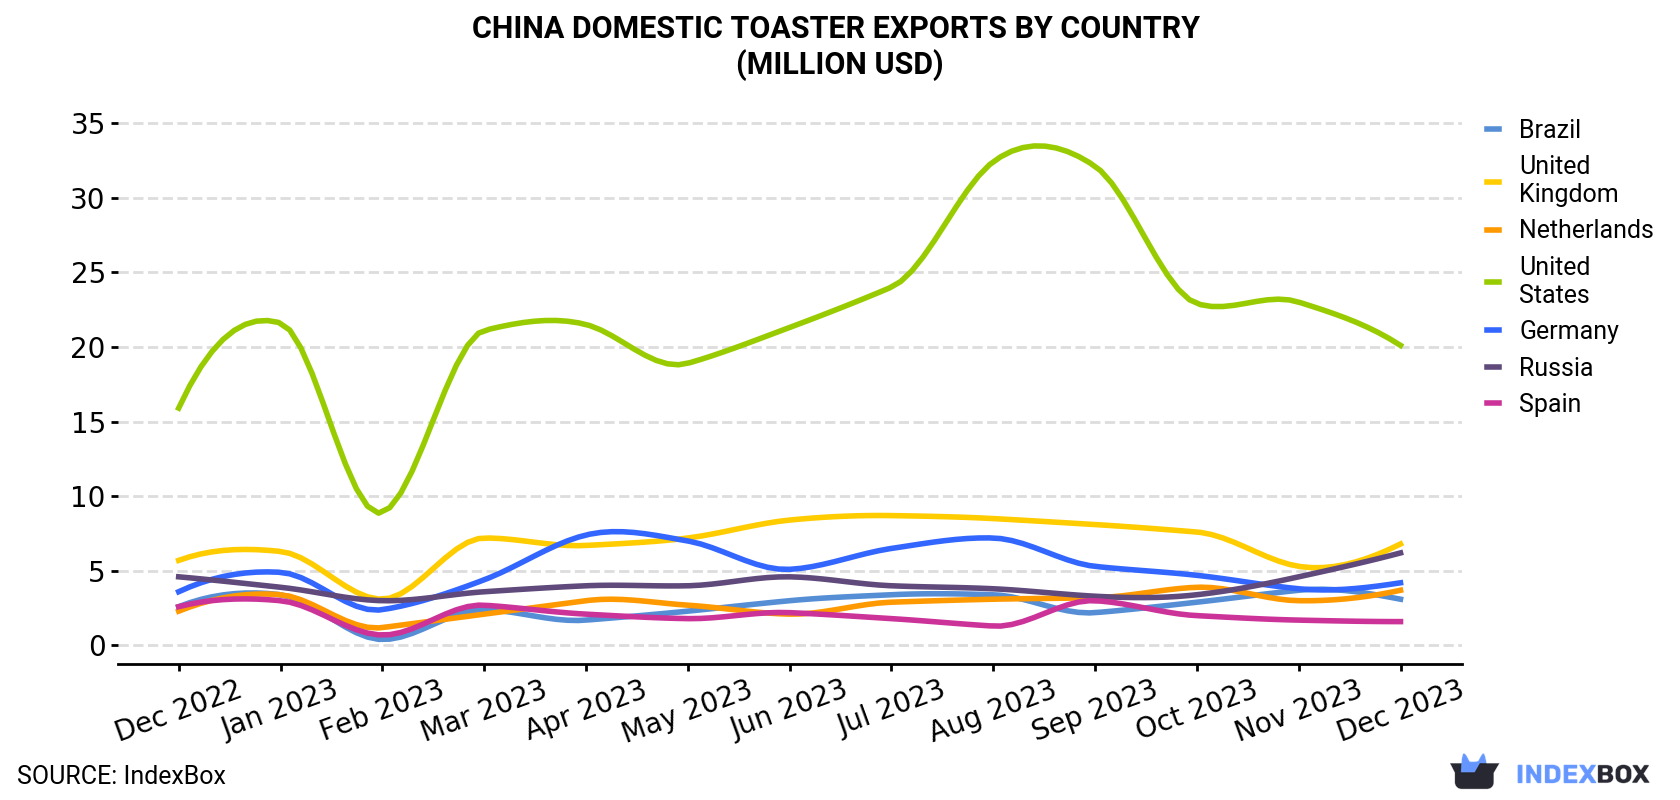 China Domestic Toaster Exports By Country (Million USD)